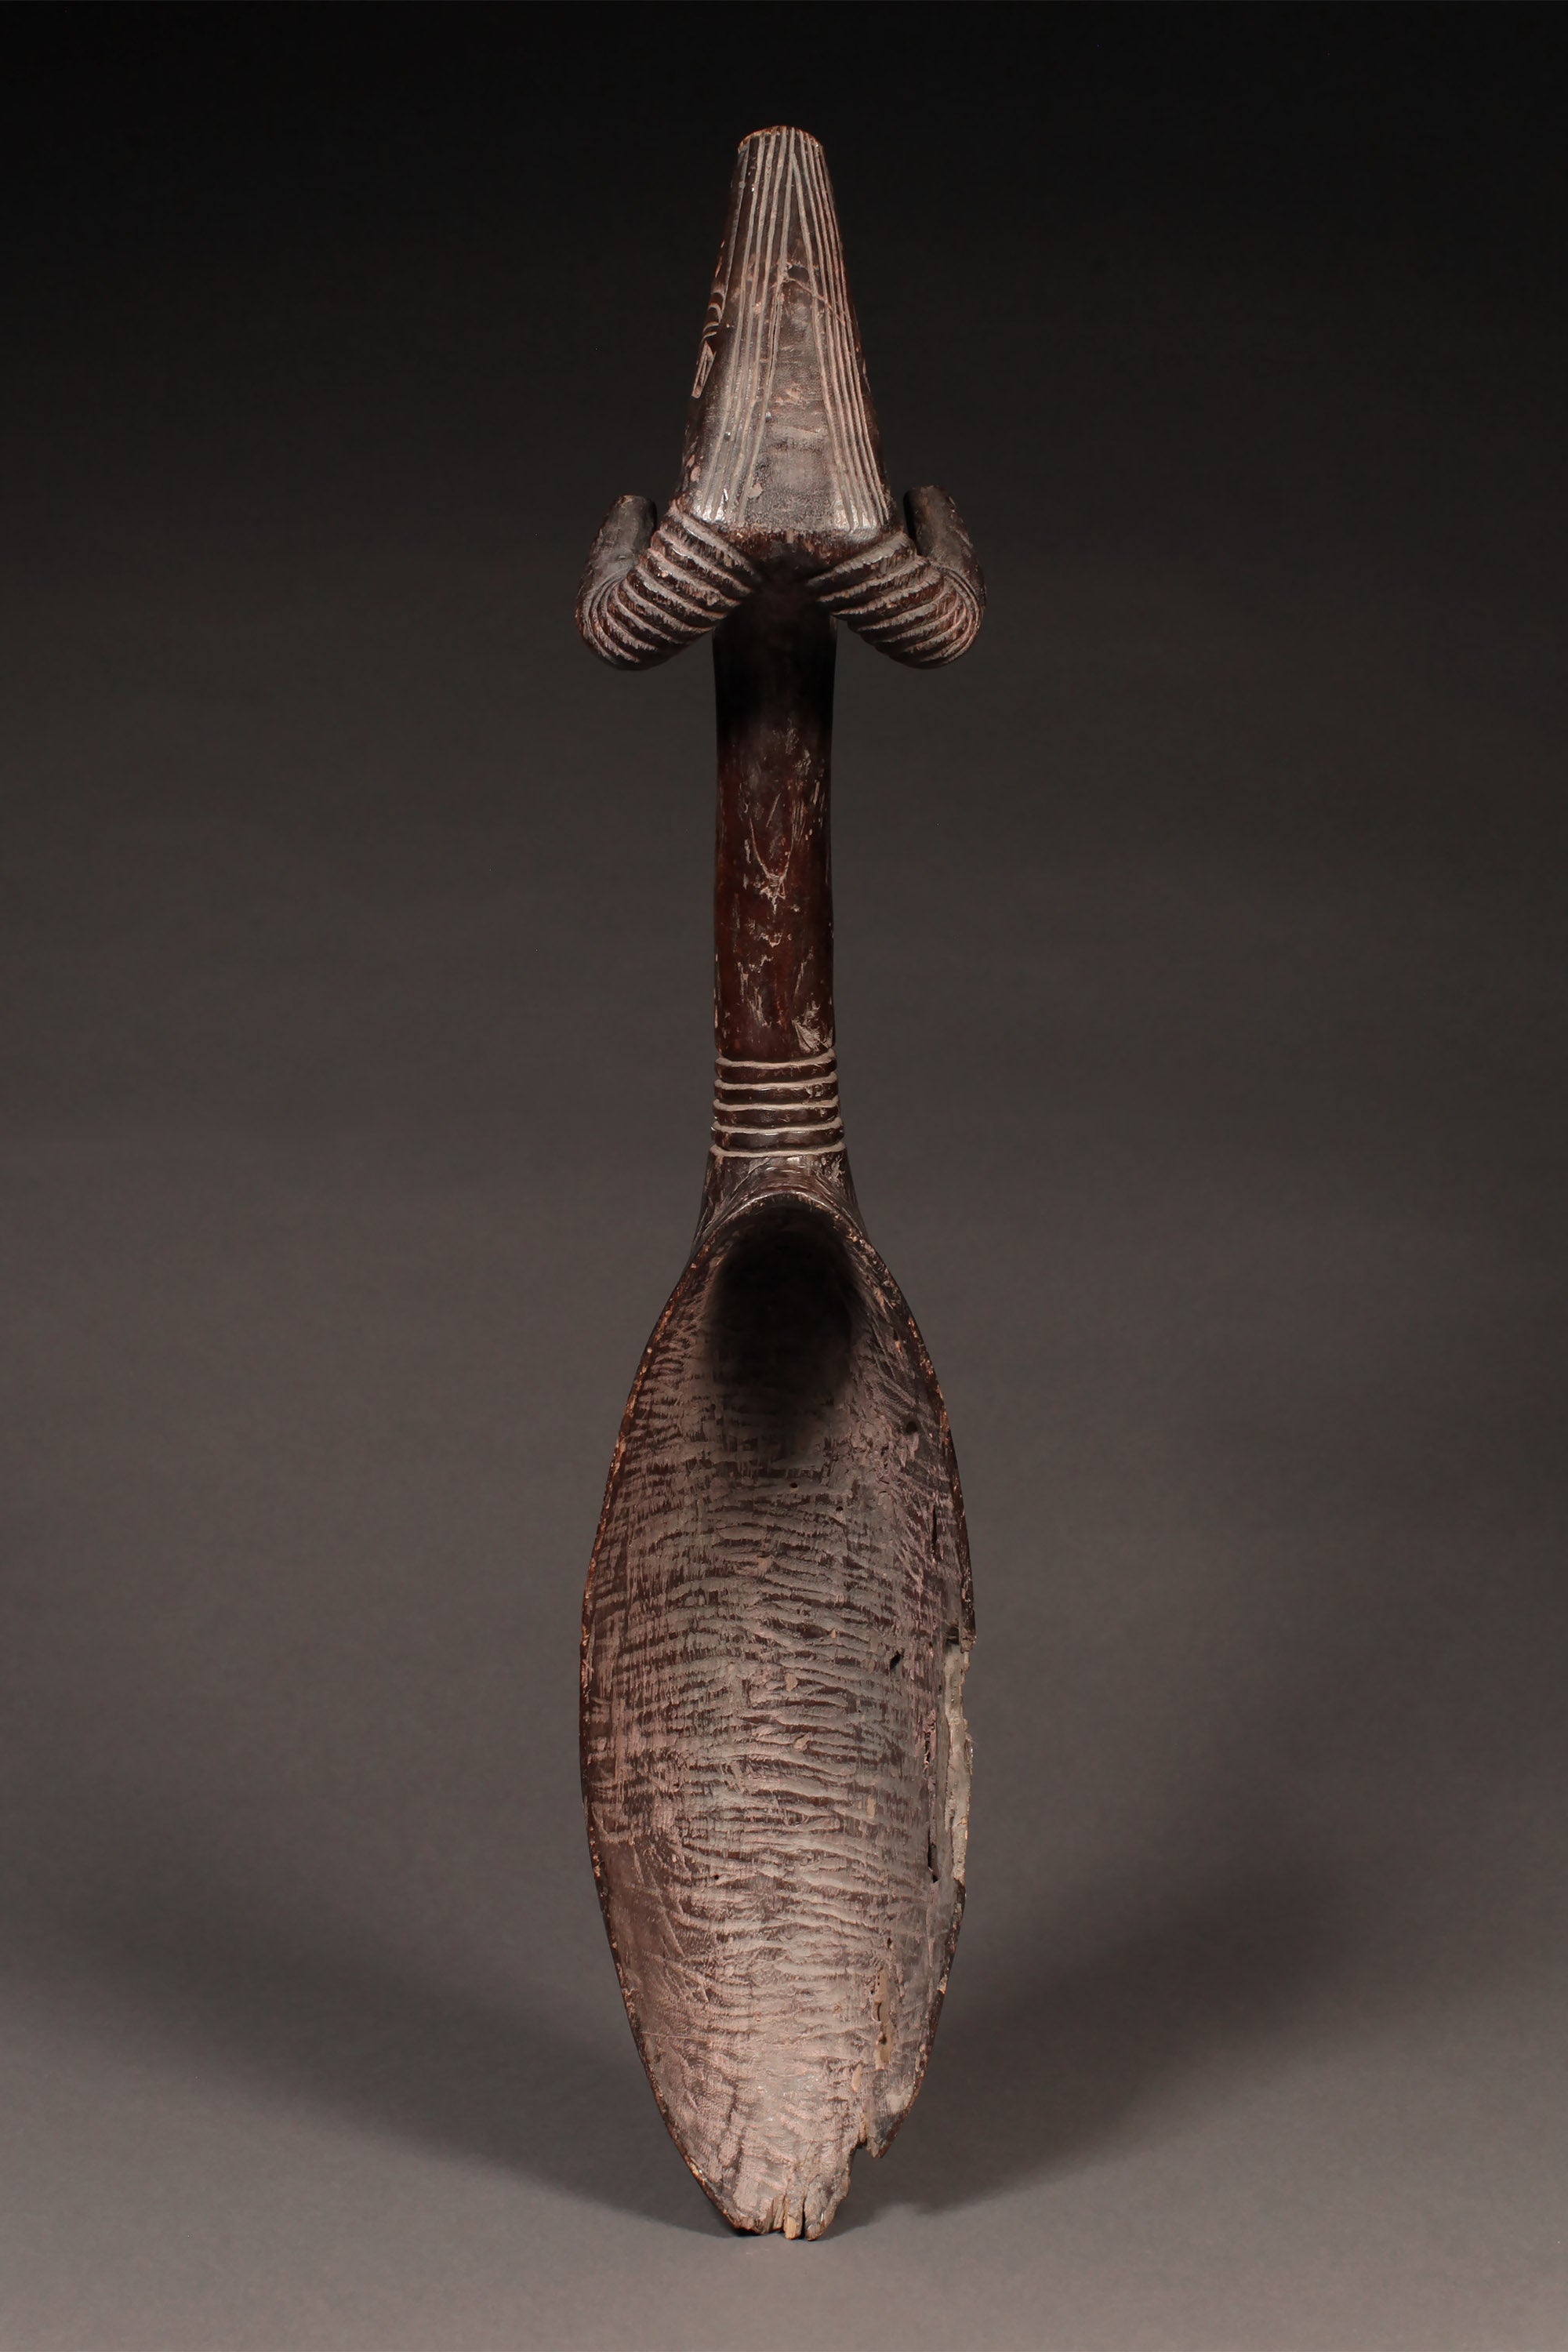 Tribal Objects - Ceremonial - Artwork - African - Folk Art - Artifacts - Dan Ladle Spoon -  Wood -  Used - Sculpture - Collectible